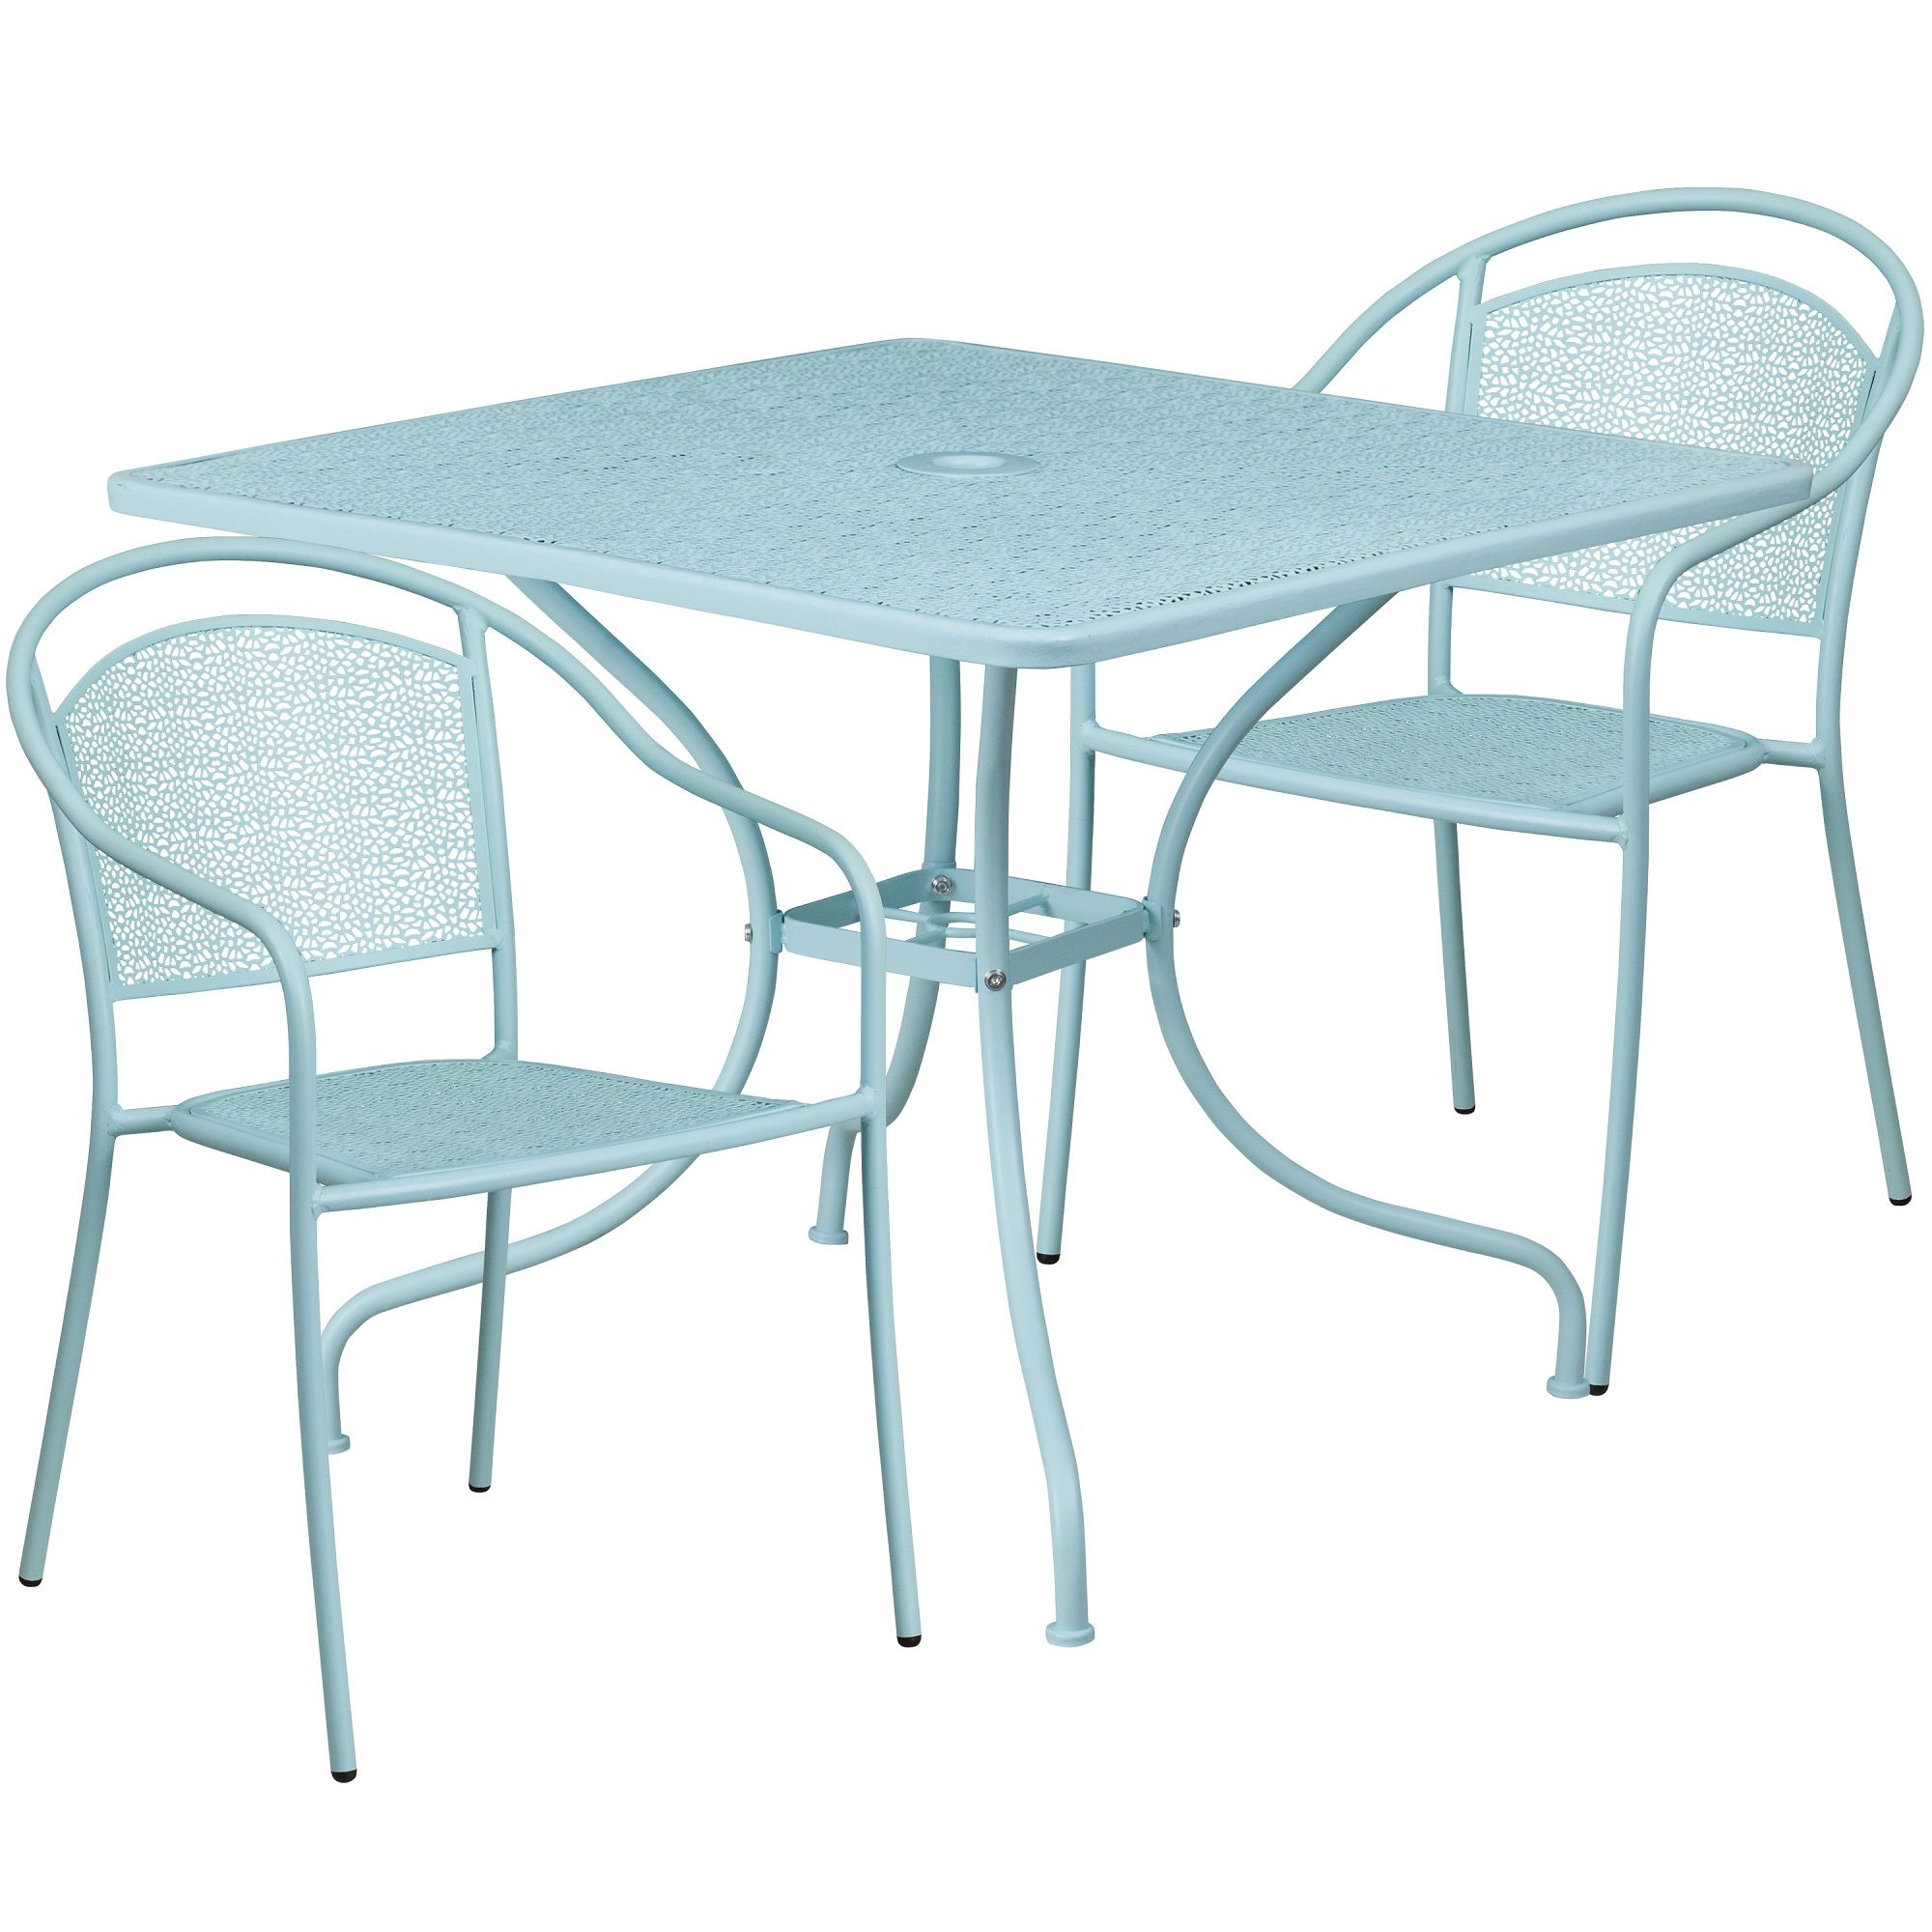 3 Piece Sky Blue Square Contemporary Outdoor Furniture Patio Table With Regarding Well Known Blue 3 Piece Outdoor Seating Sets (View 12 of 15)